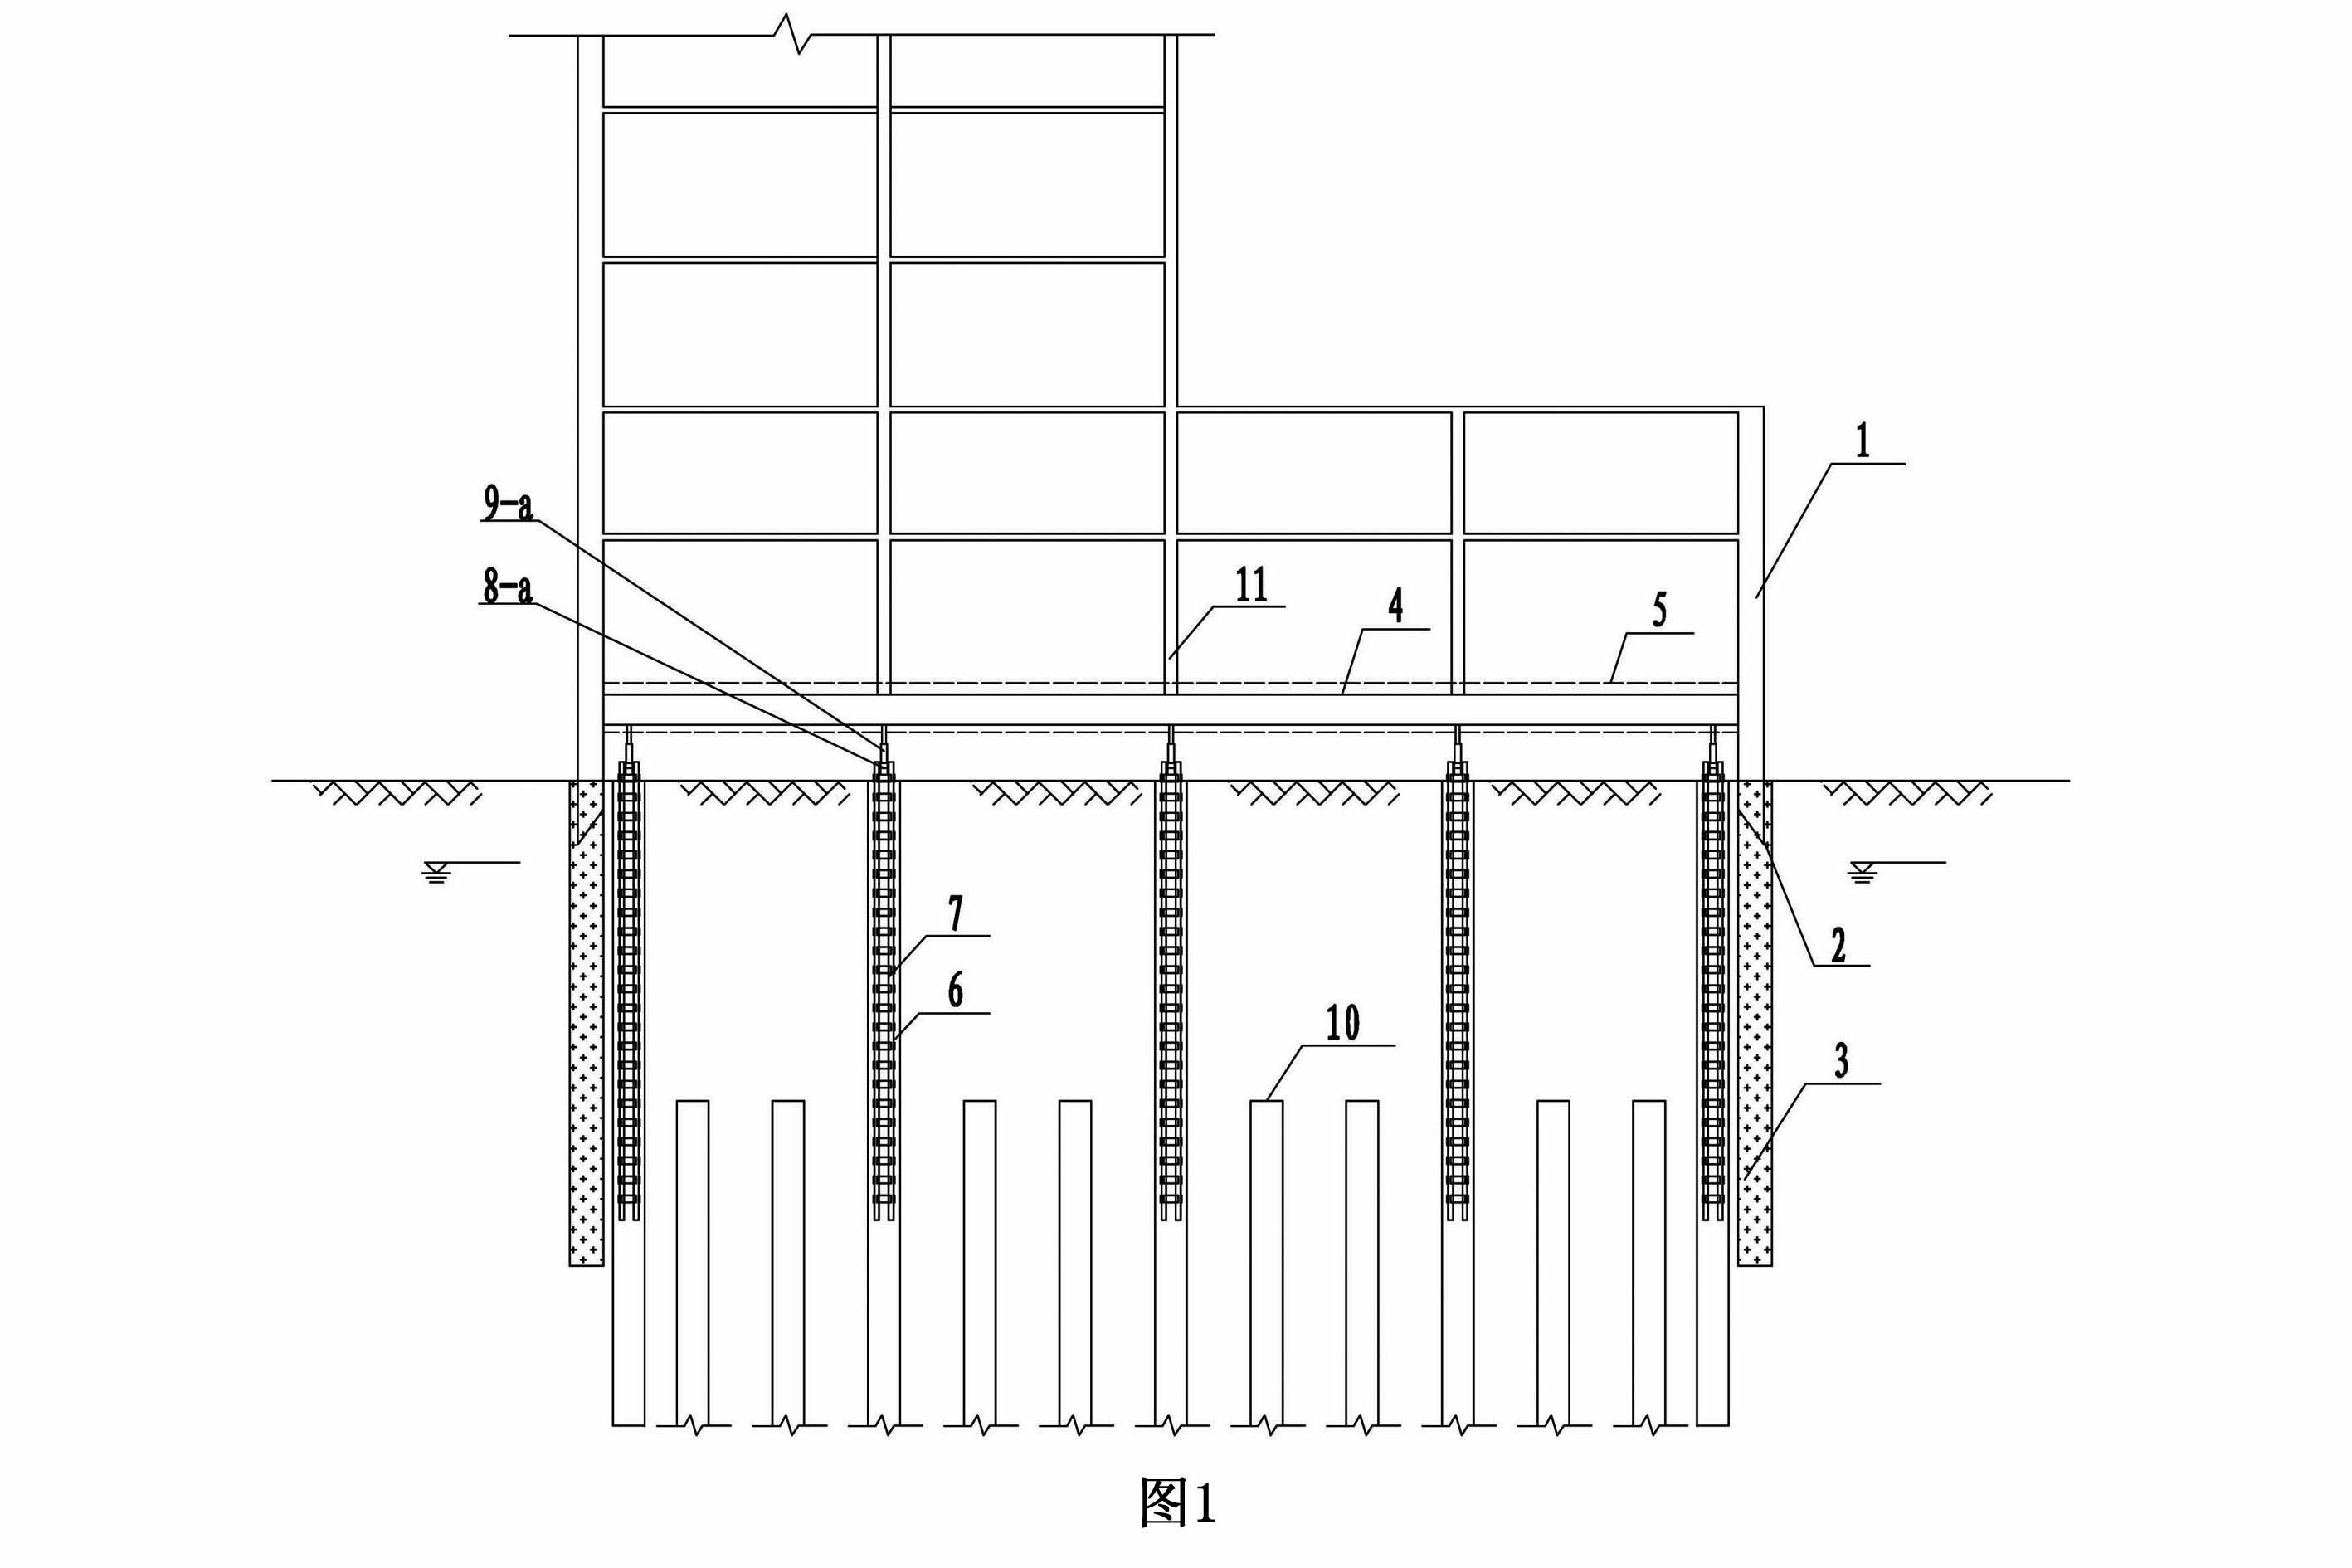 Construction method of pre-building supported and settled foundation on ground and fixing after pre-pressing for high-rise building with basement